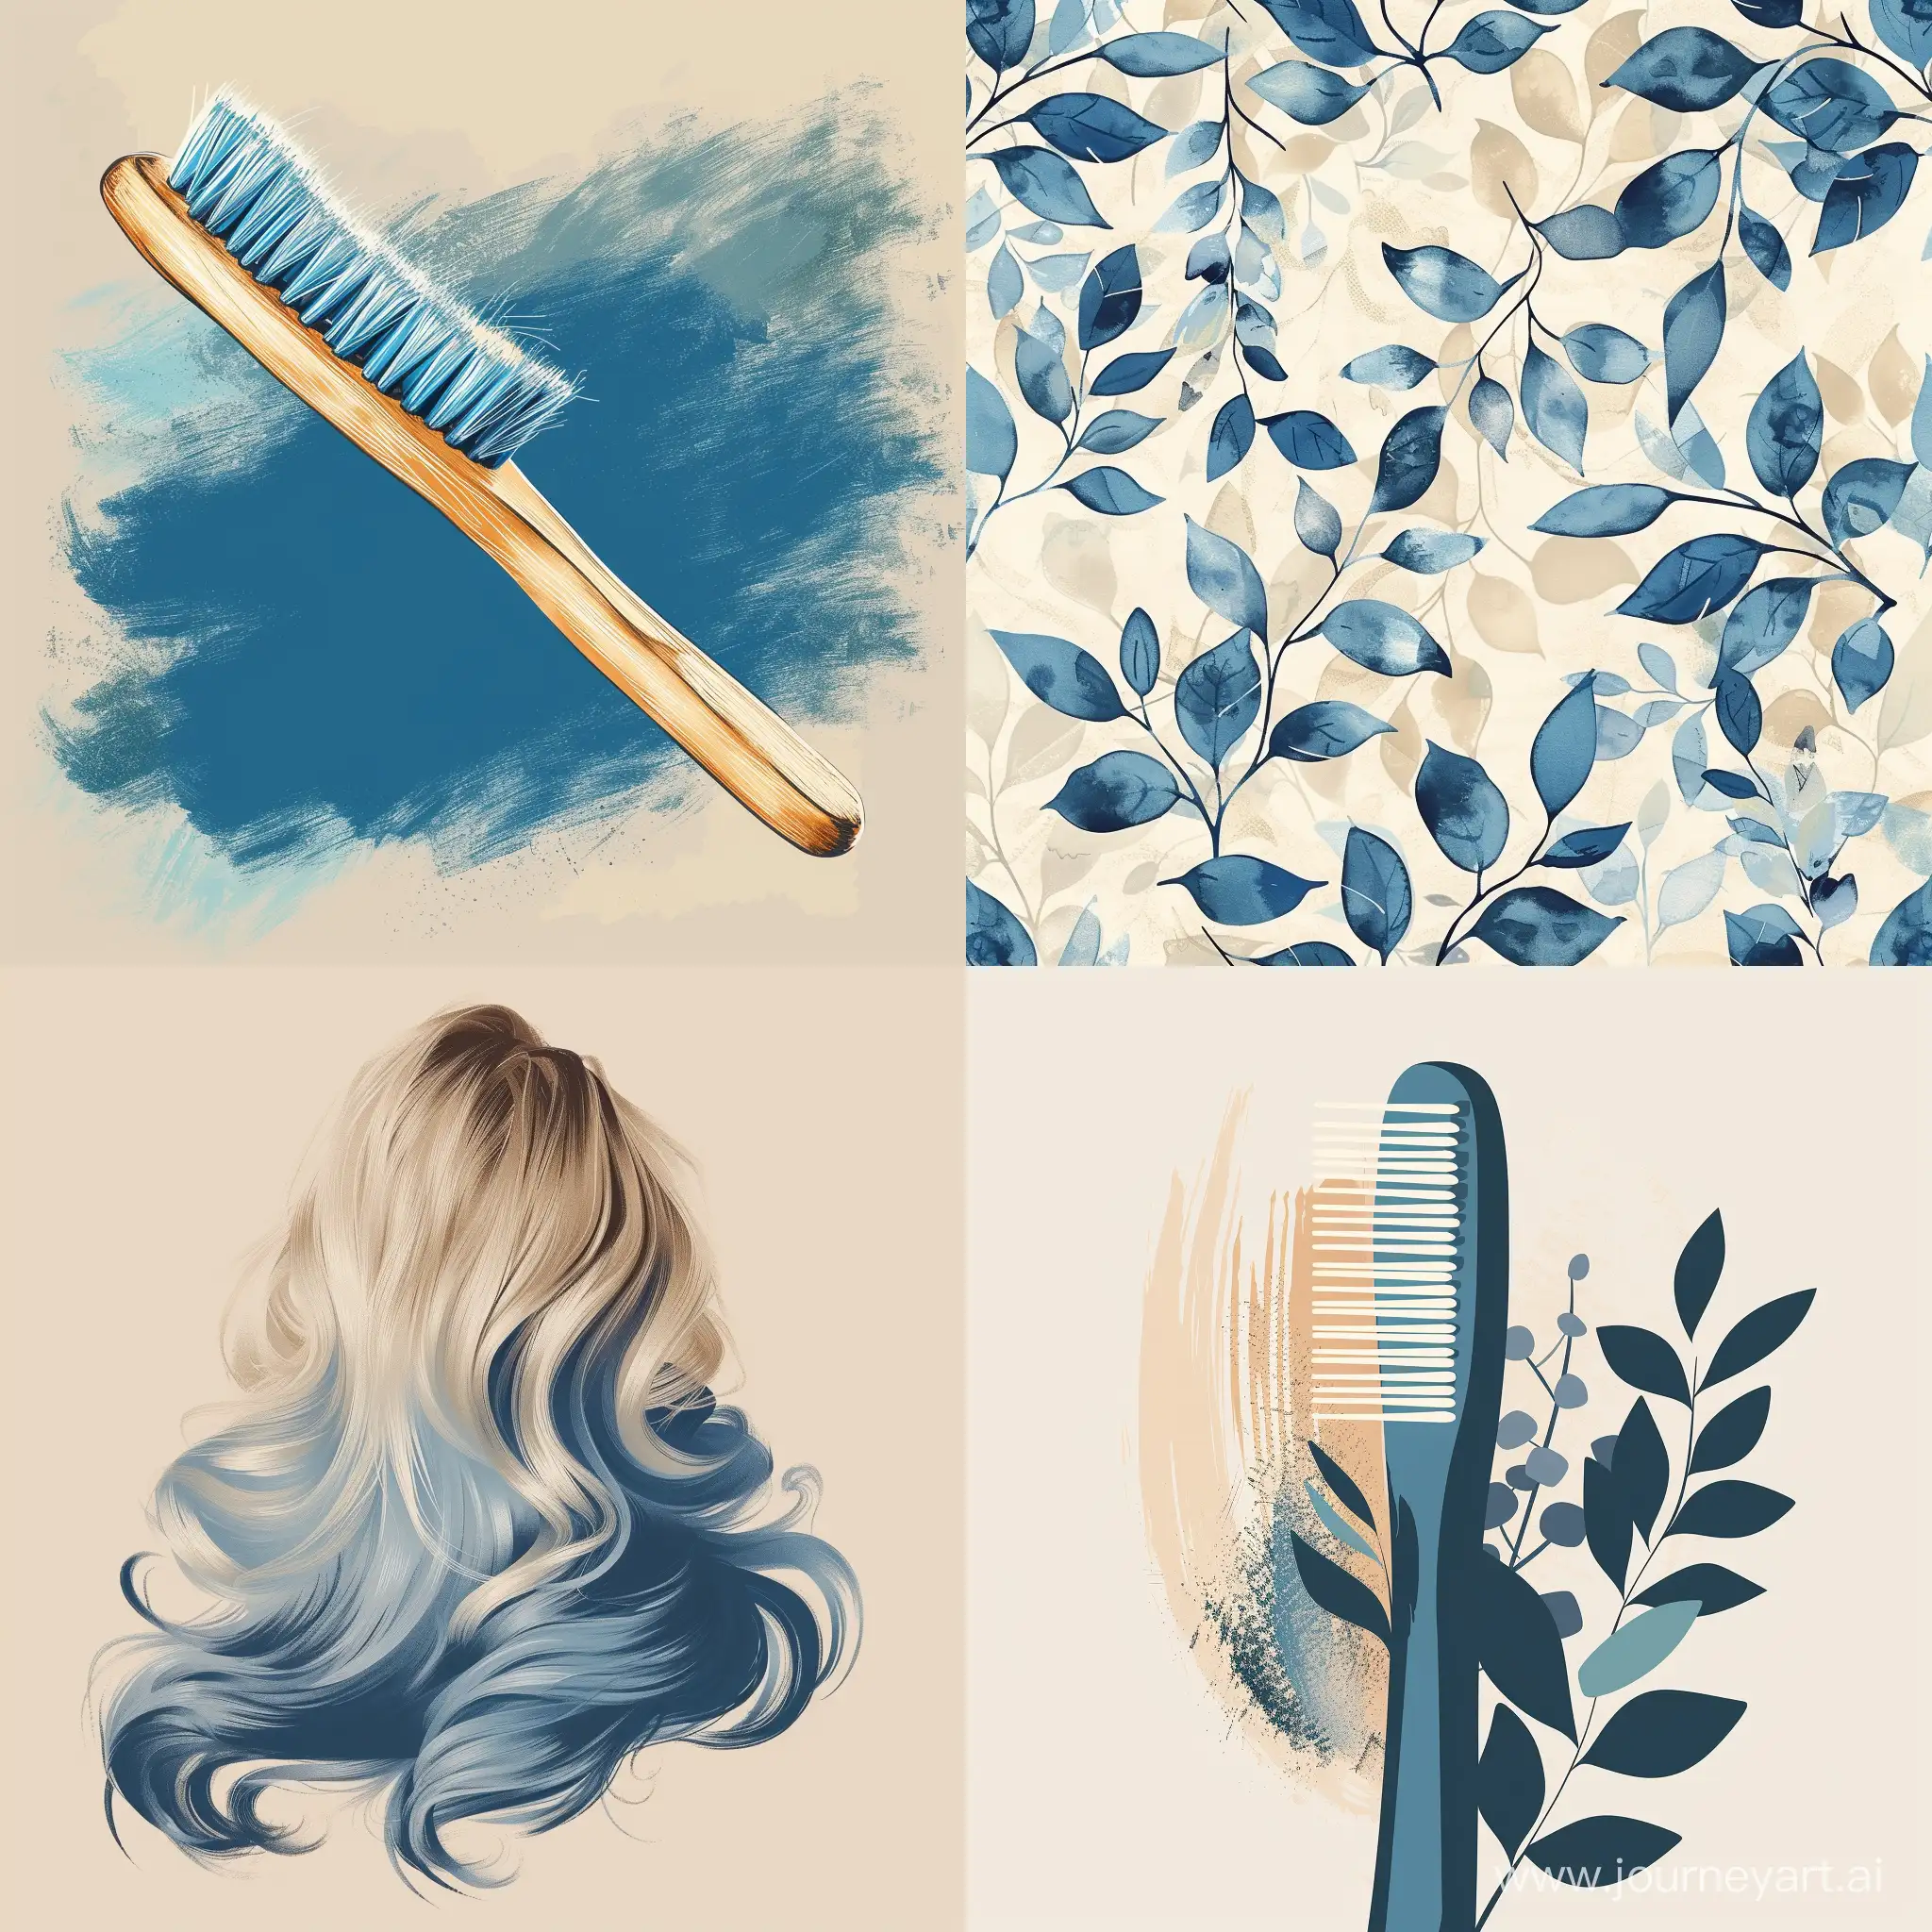 Chic-Beige-and-Blue-VK-Community-Design-with-Brush-Strokes-Version-6